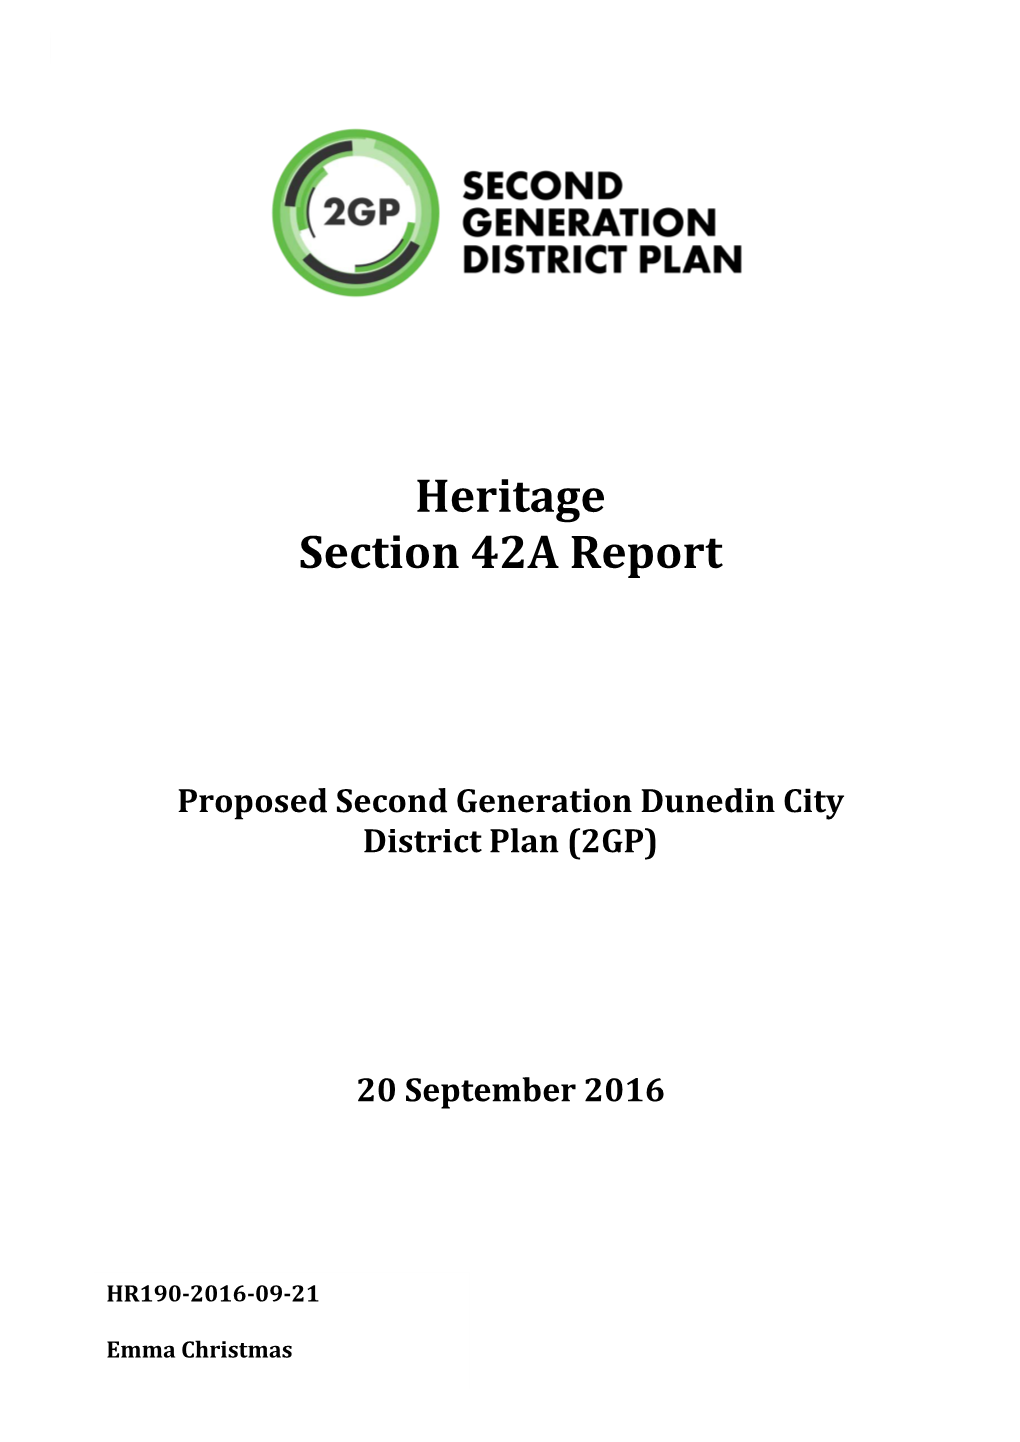 Heritage Section 42A Report